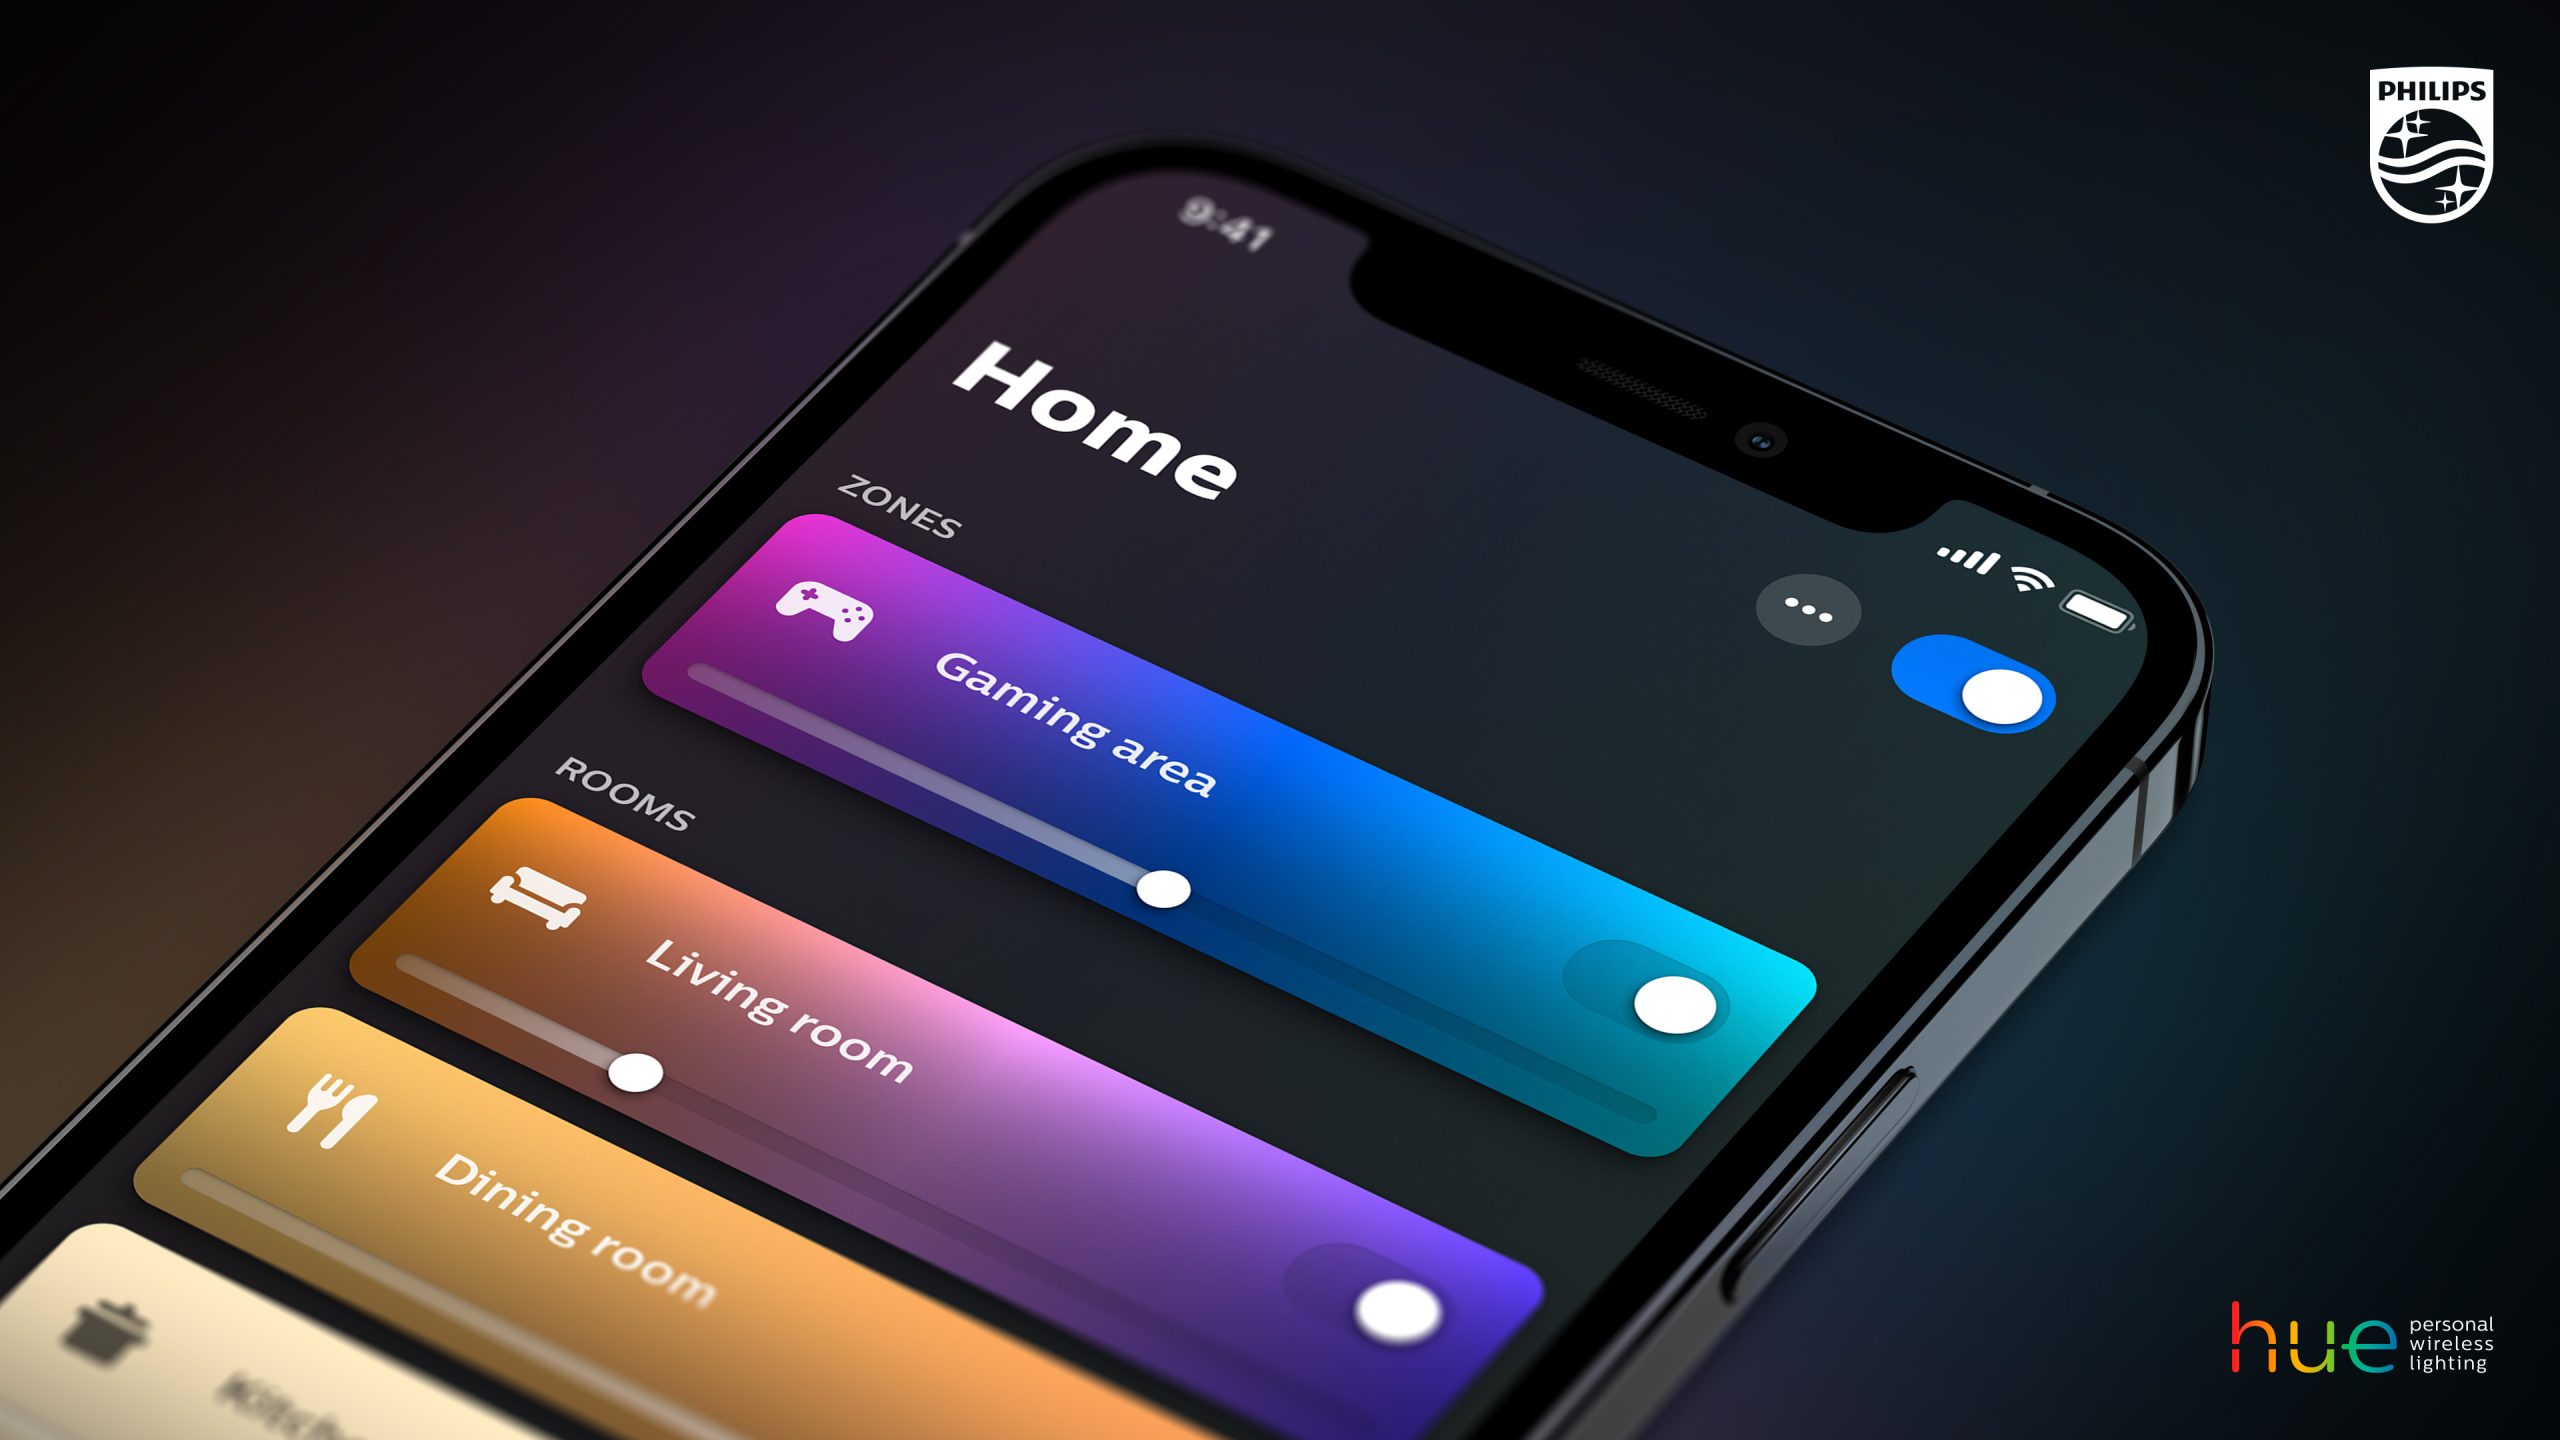 Philips Hue app 4.0 Now All new Features and Improvements